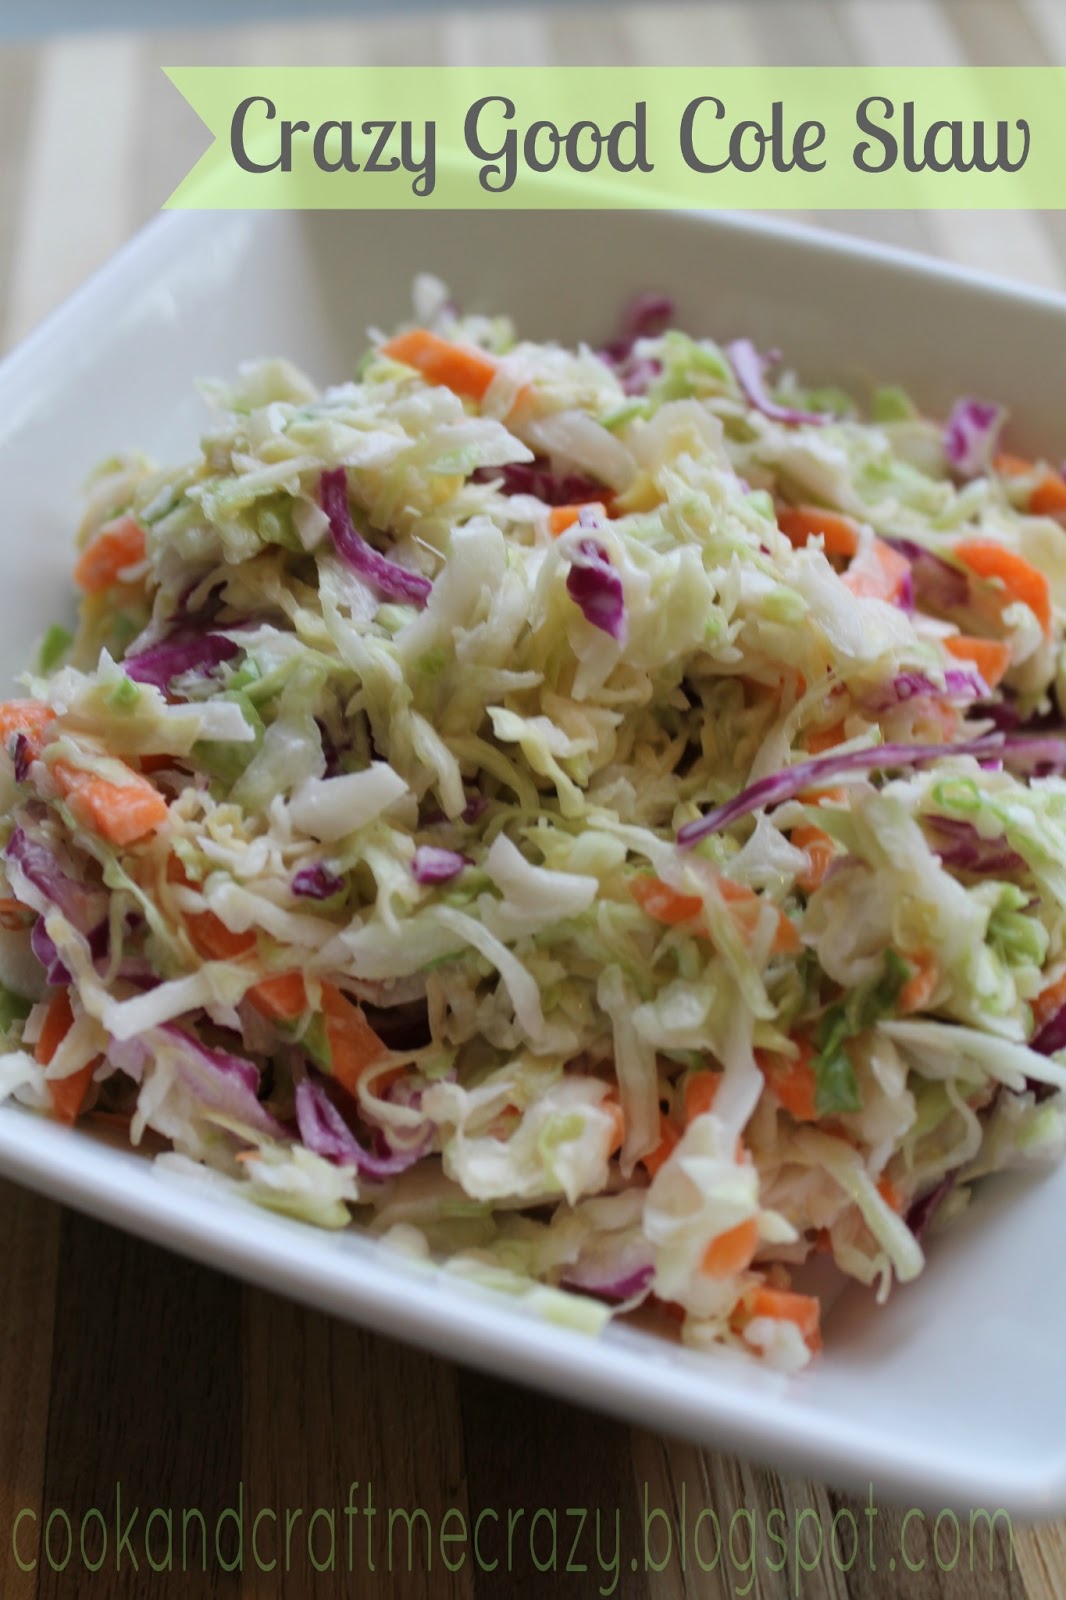 Cook and Craft Me Crazy: Crazy Good Cole Slaw